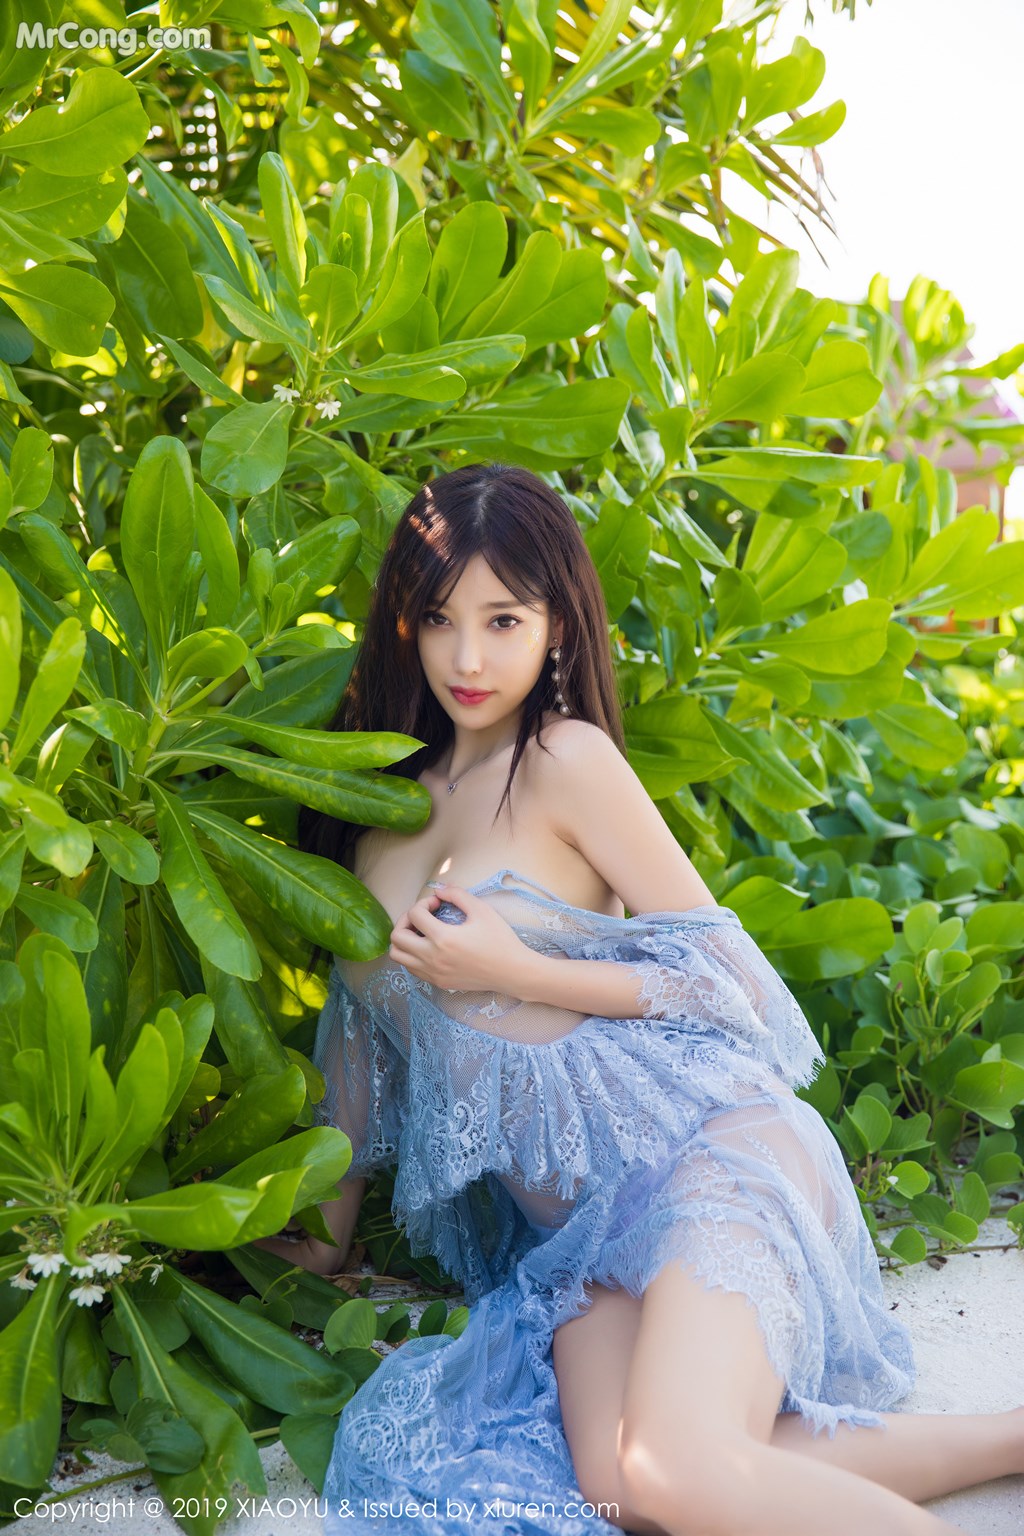 XiaoYu Vol.067: Yang Chen Chen (杨晨晨 sugar) (66 pictures)